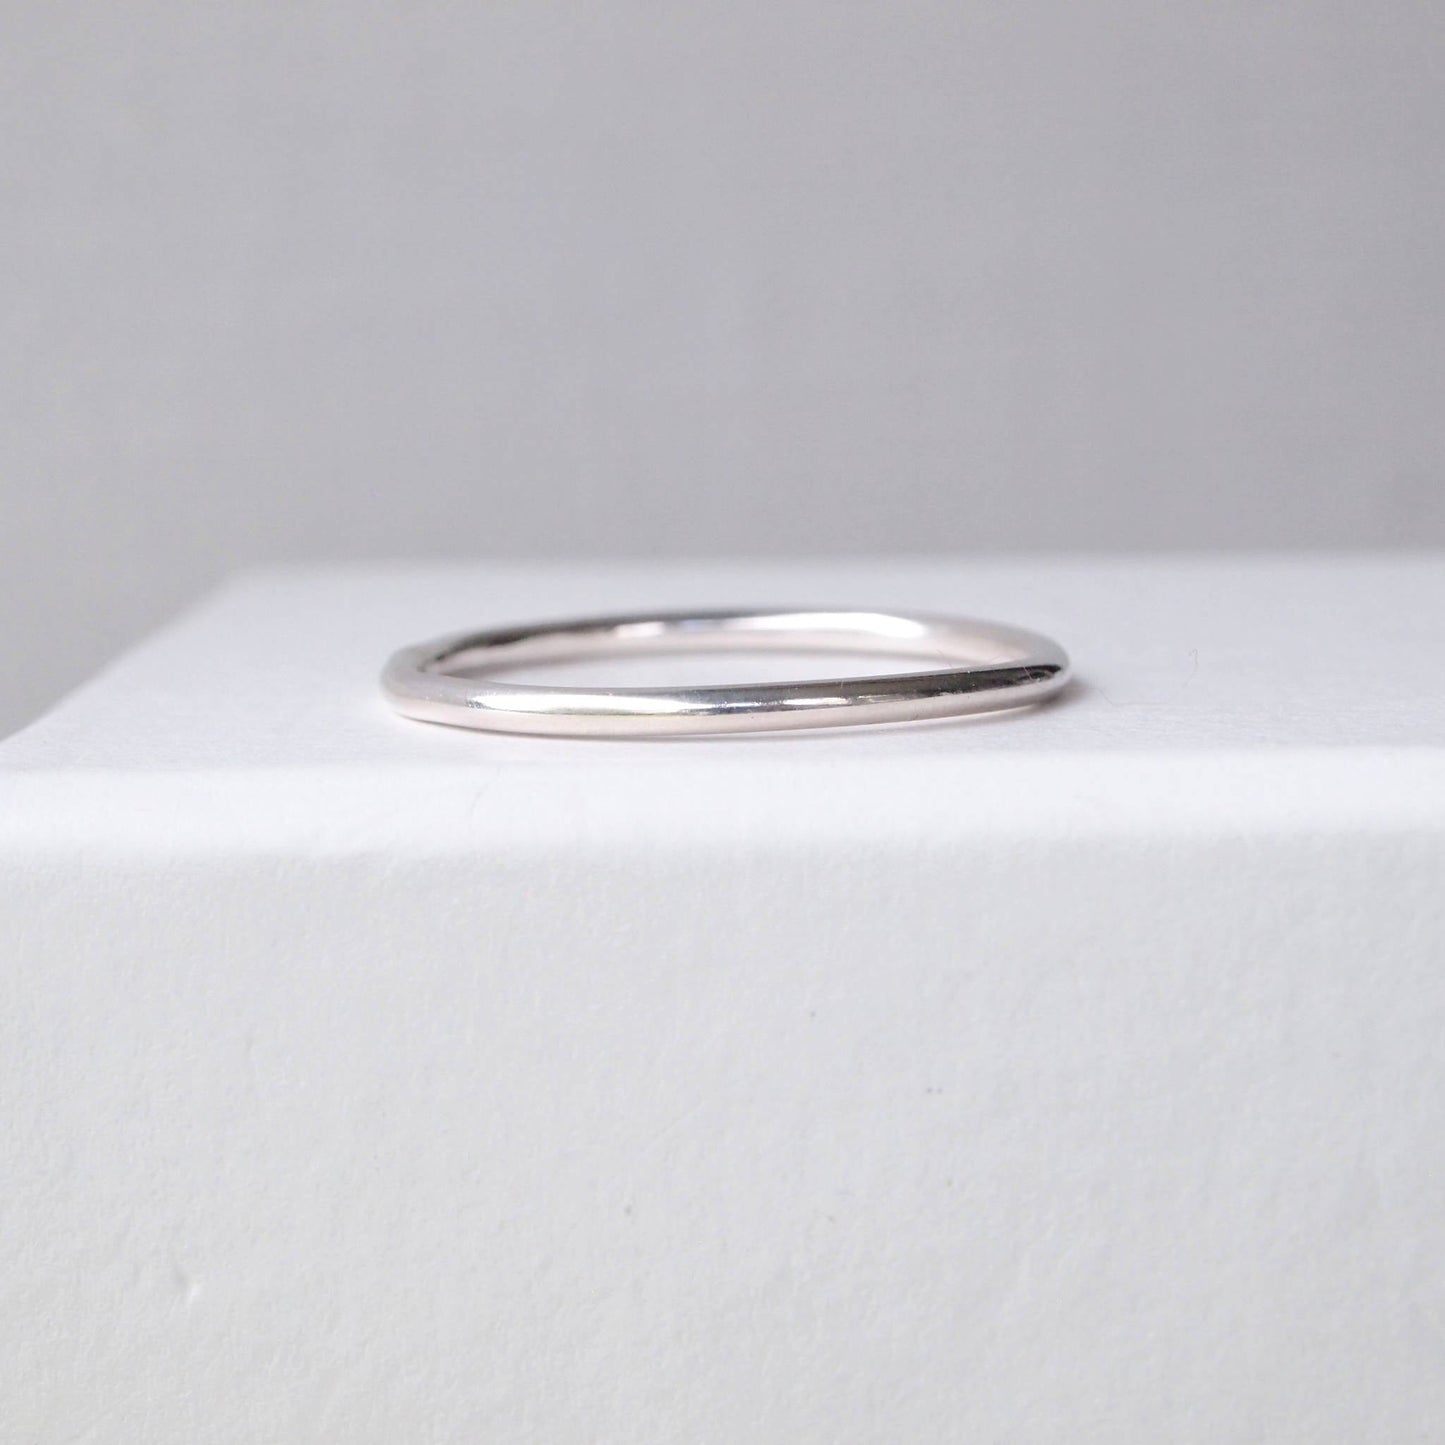 Plain round profile wedding plain band with no details. minimalist sterling Silver ring pictured on a white background. Handmade to your ring size by maram jewellery in Edinburgh UK